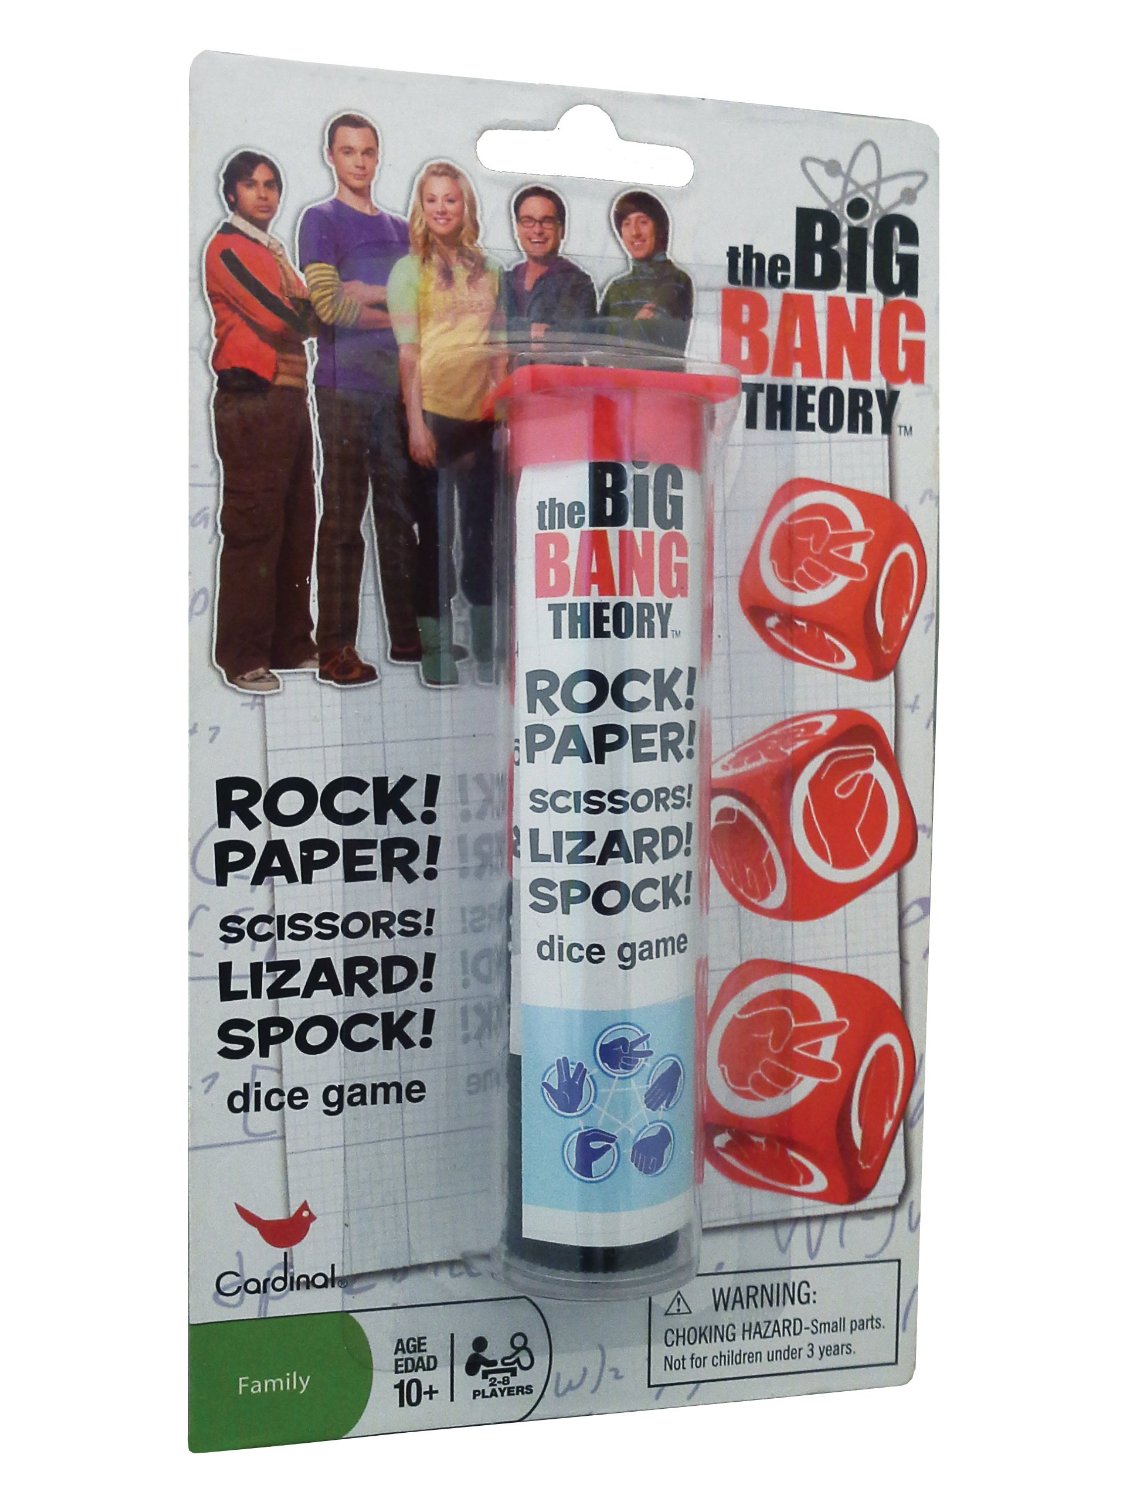 The Big Bang Theory Rock Paper Scissors Dice Game